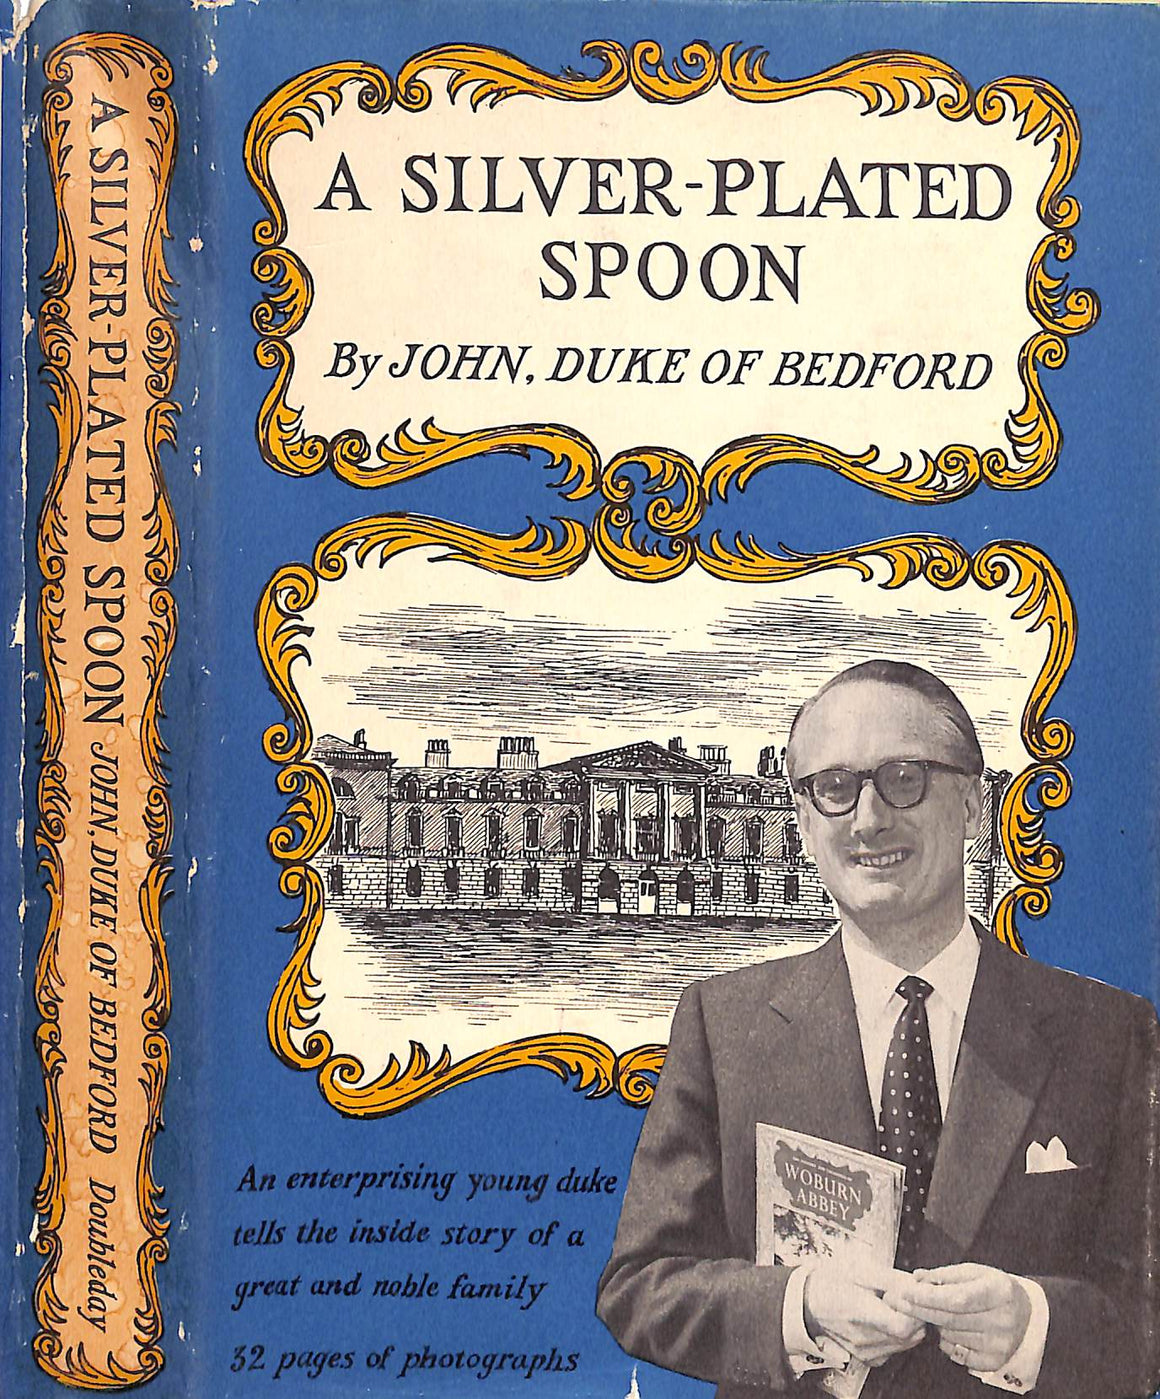 "A Silver-Plated Spoon" 1959 Duke Of Bedford, John (INSCRIBED)